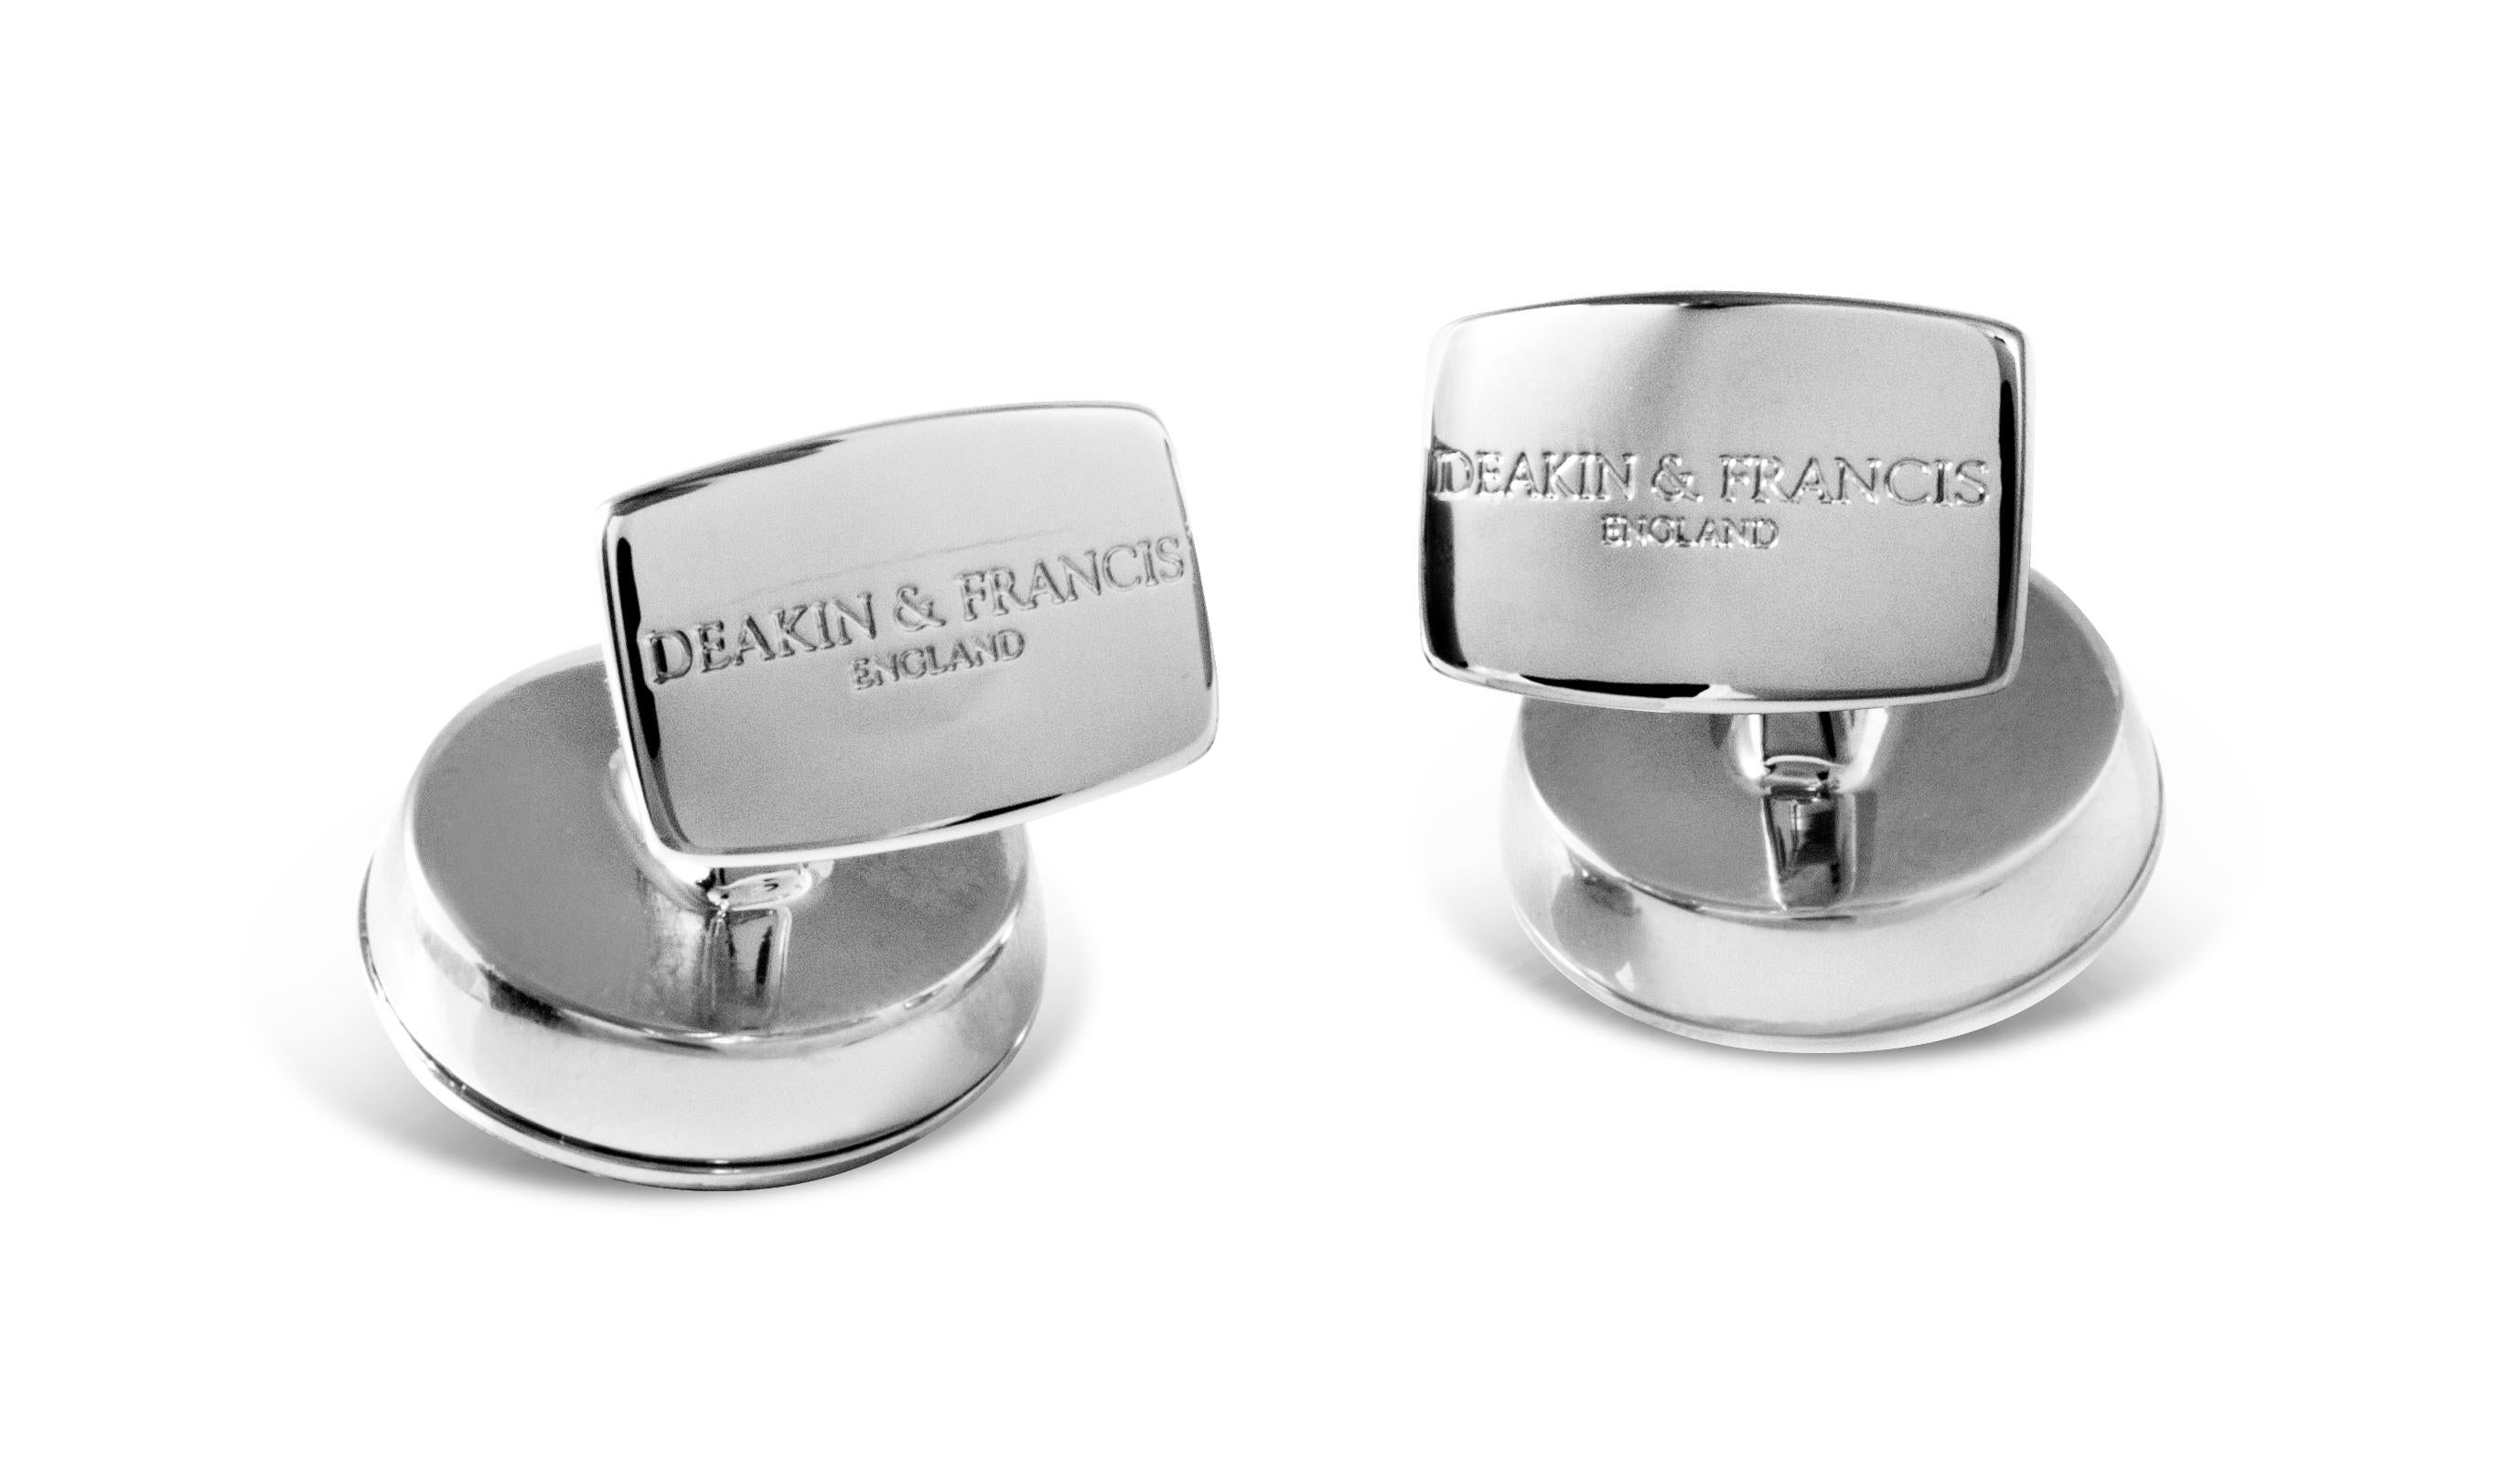 DEAKIN & FRANCIS, Piccadilly Arcade, London

These gimbal cufflinks really will get you spinning in amazement!

A set of three gimbals, one mounted on the other, with two axis, holds a stunning smoky quartz bead which spins freely at the flick of a